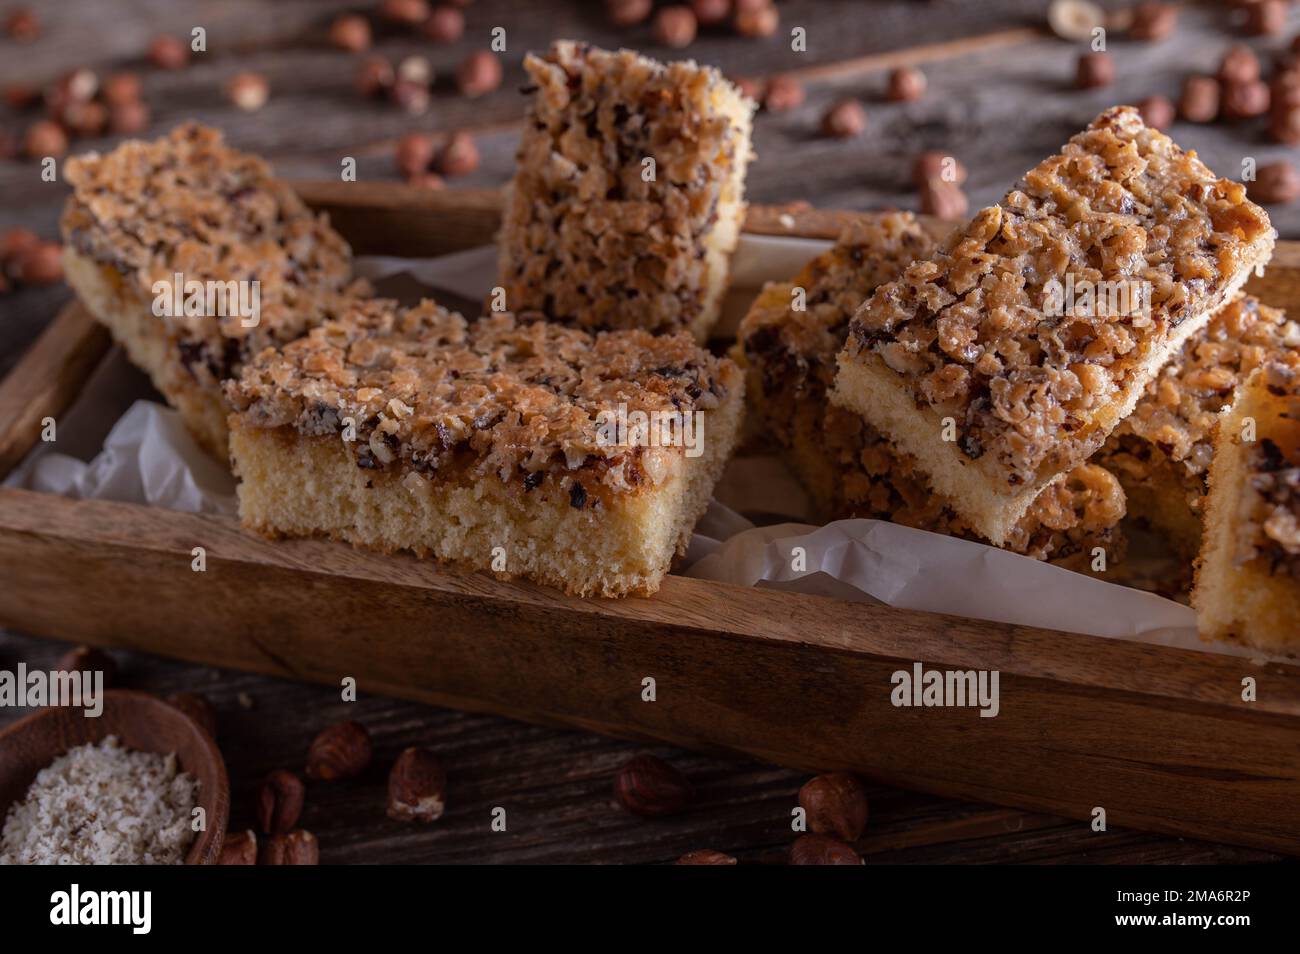 Cake with nuts on wooden table Stock Photo